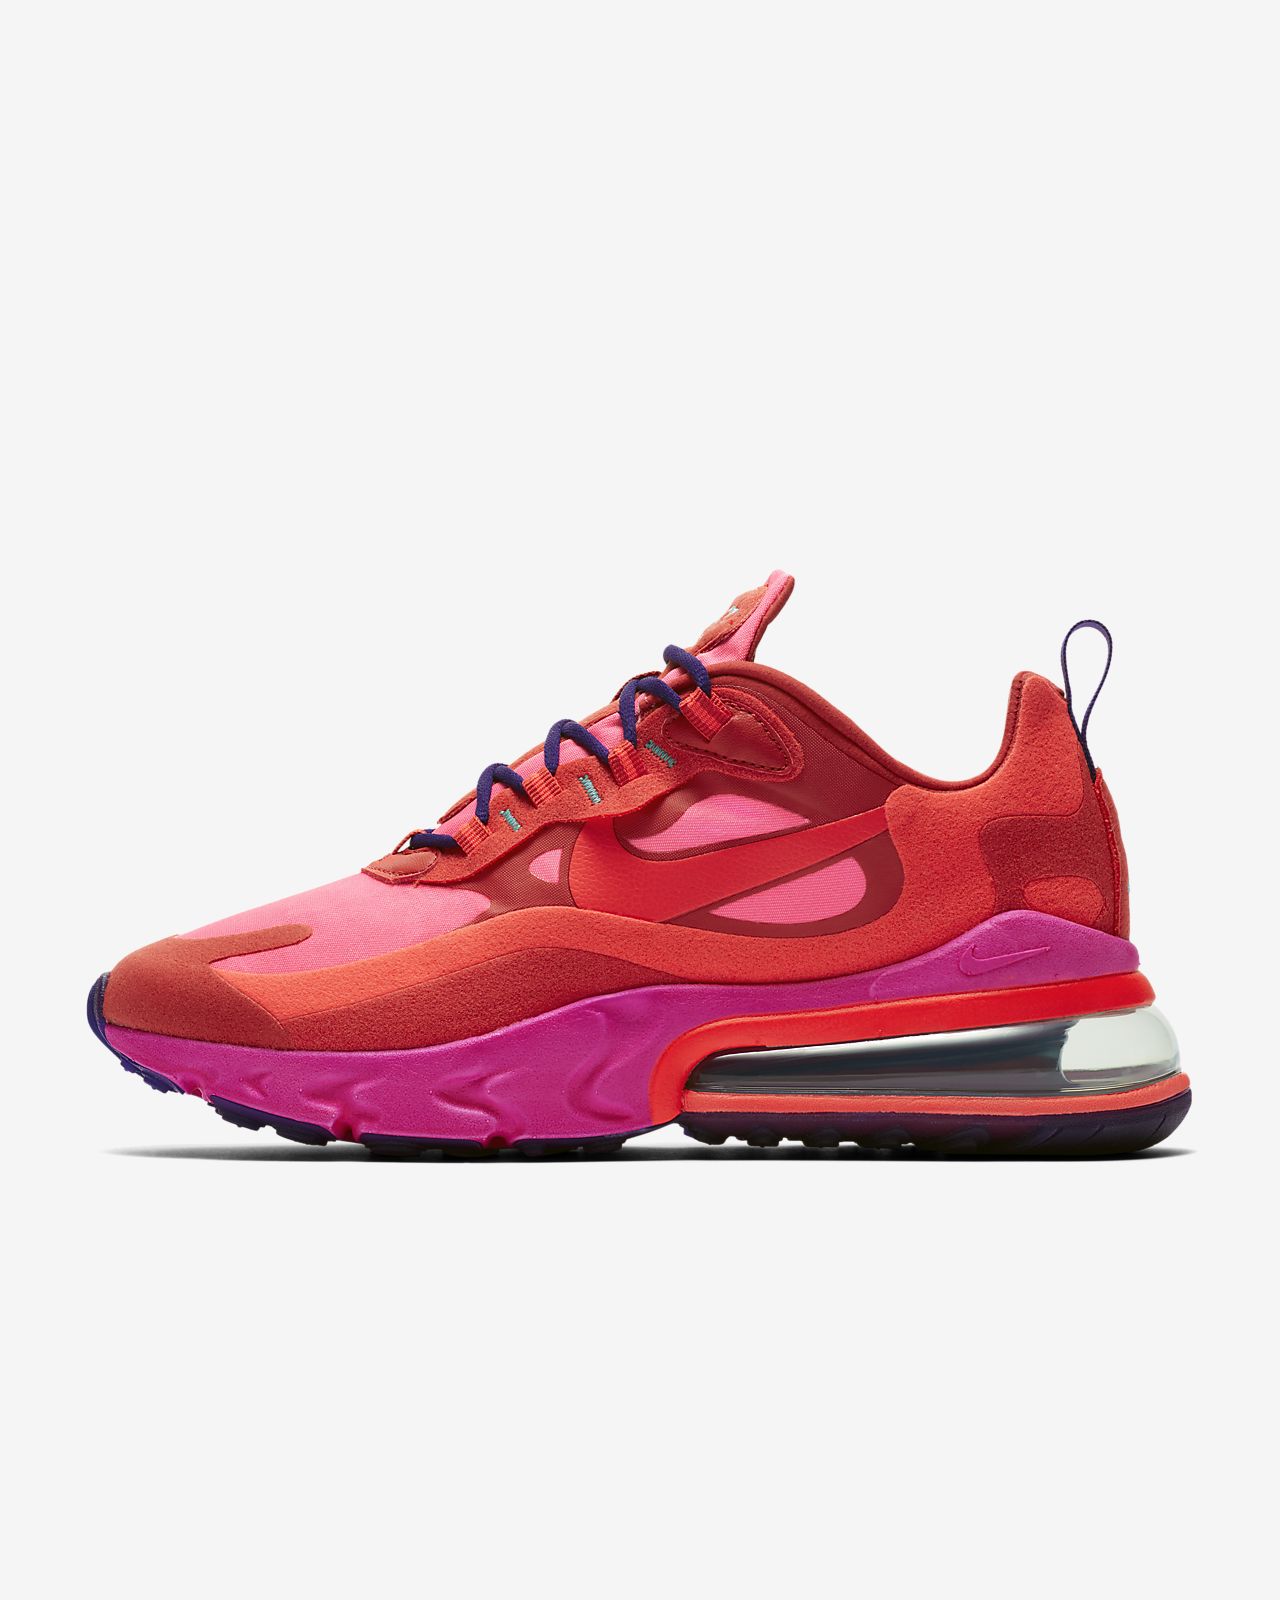 nike 270 react red and pink